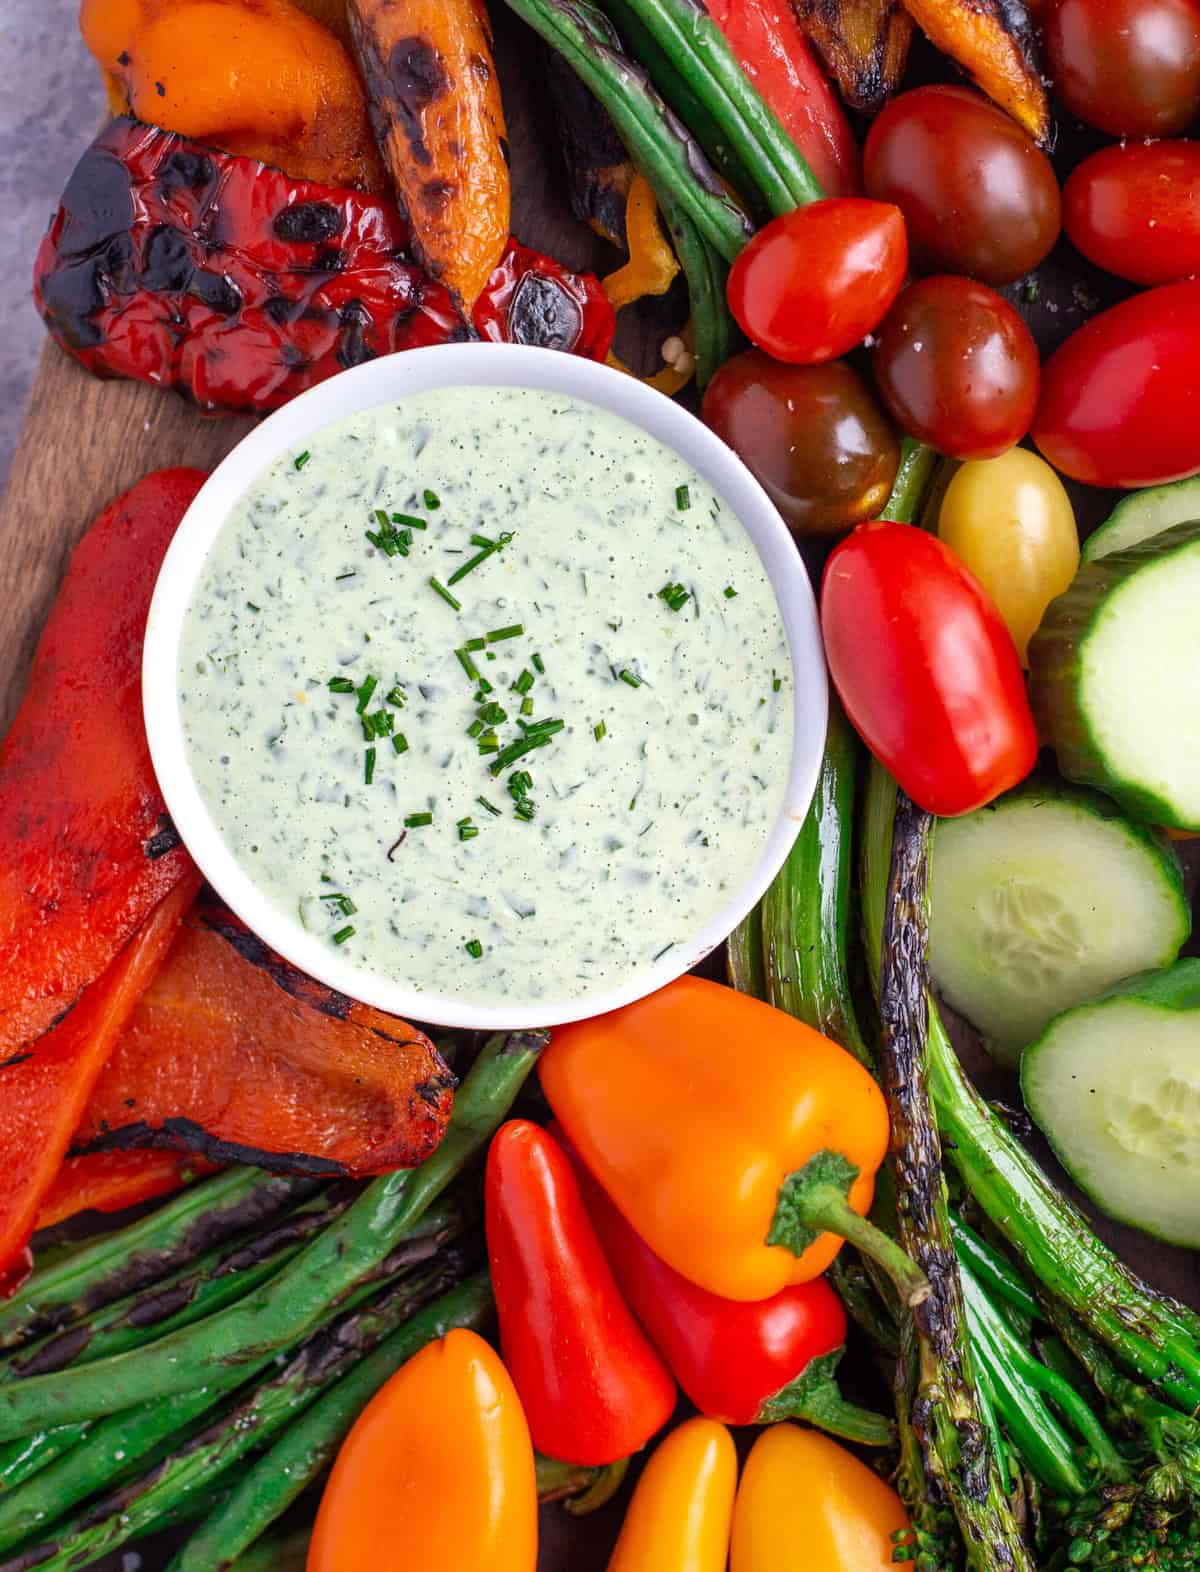 A fresh creamy Tarragon Dip in a bowl surrounded by grilled vegetables